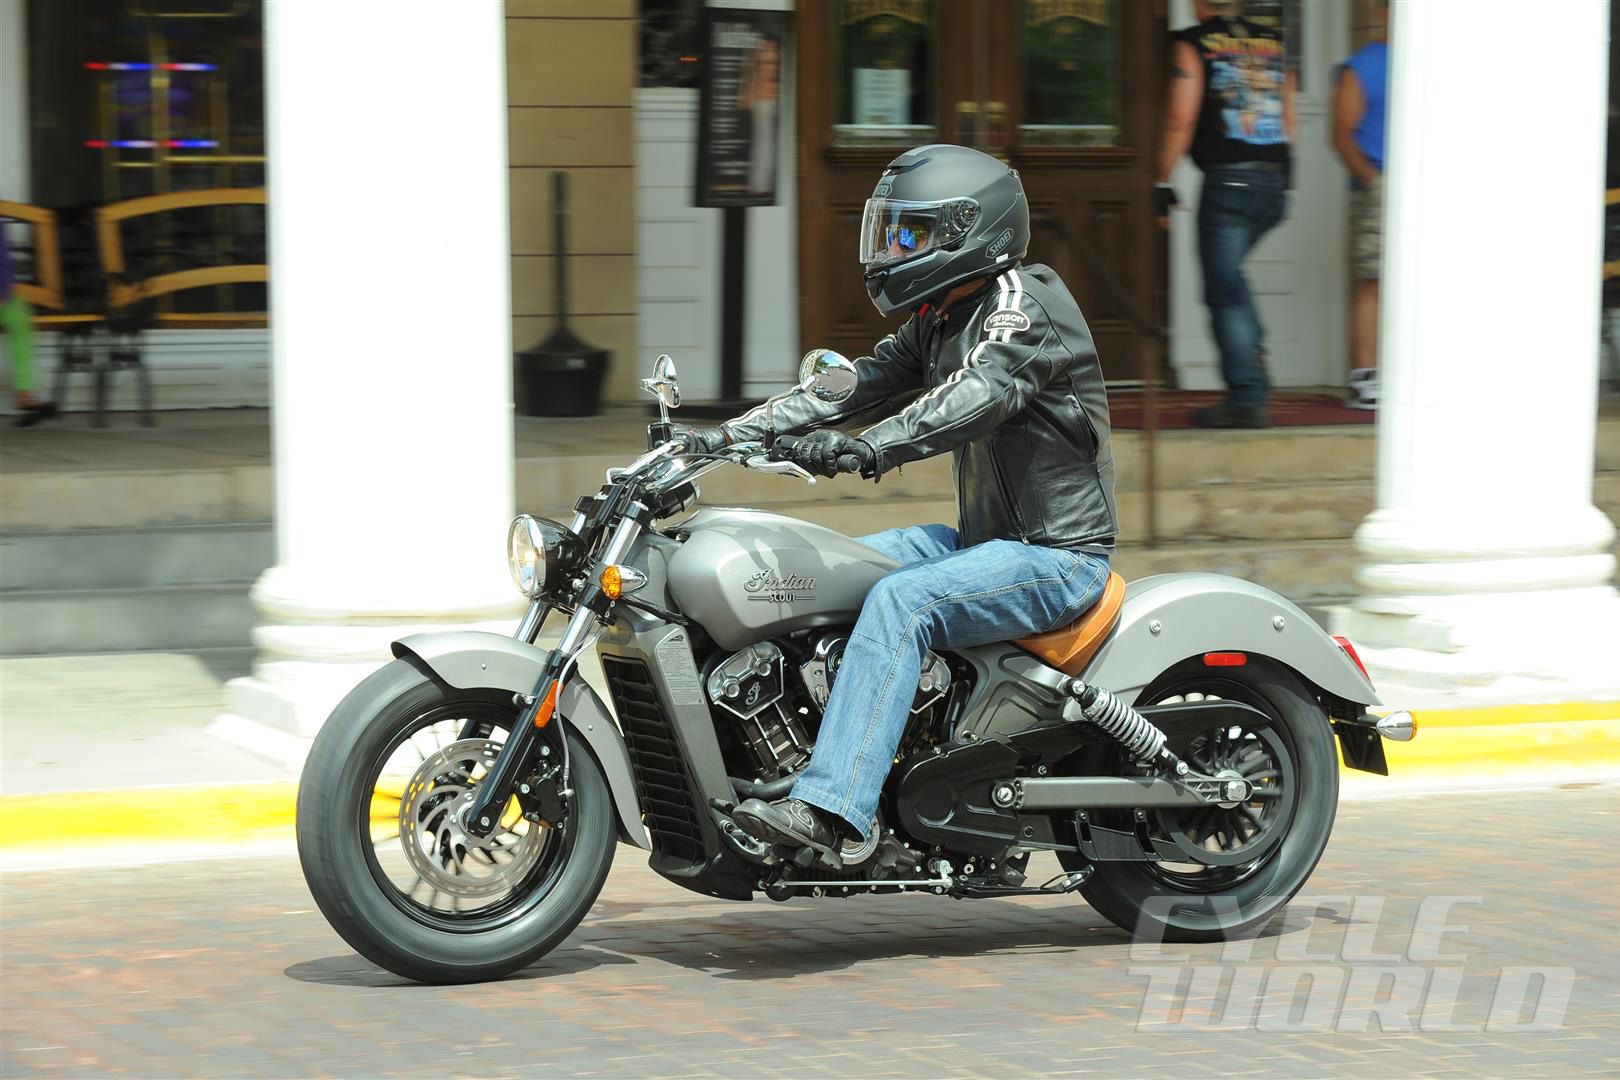 2015 Indian Scout Cruiser Motorcycle Review Road Test Photos Specs Cycle World